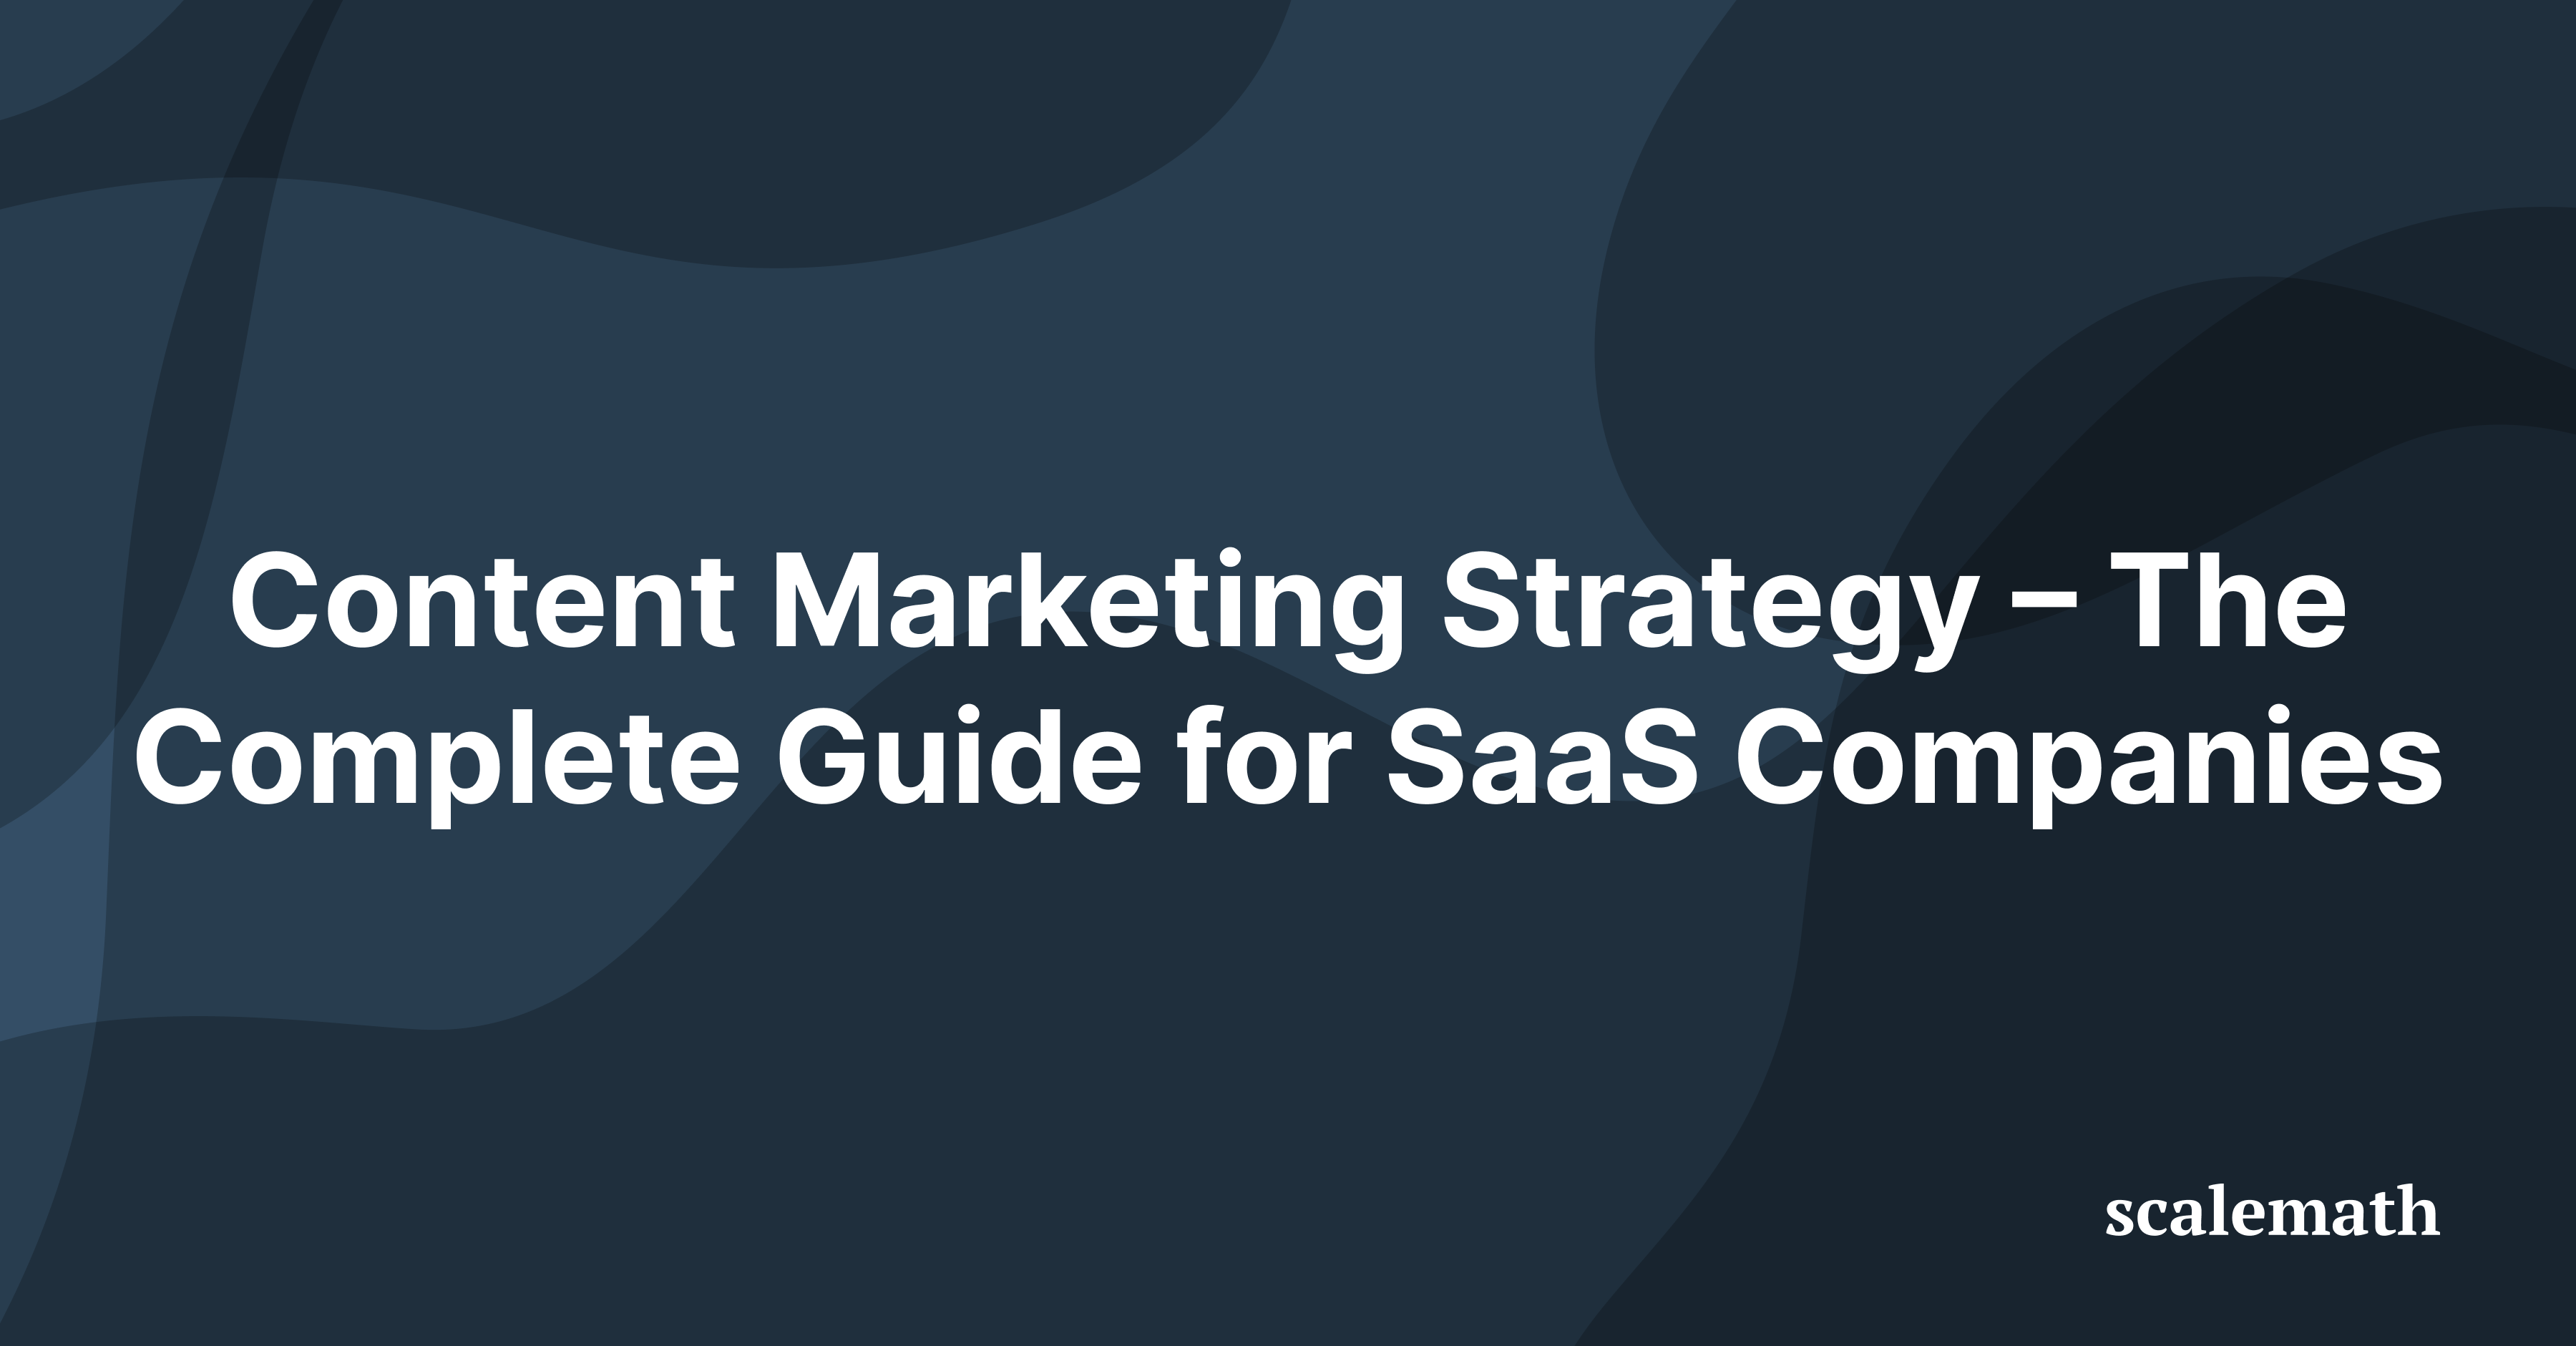 Content Marketing Strategy – The Complete Guide for SaaS Companies